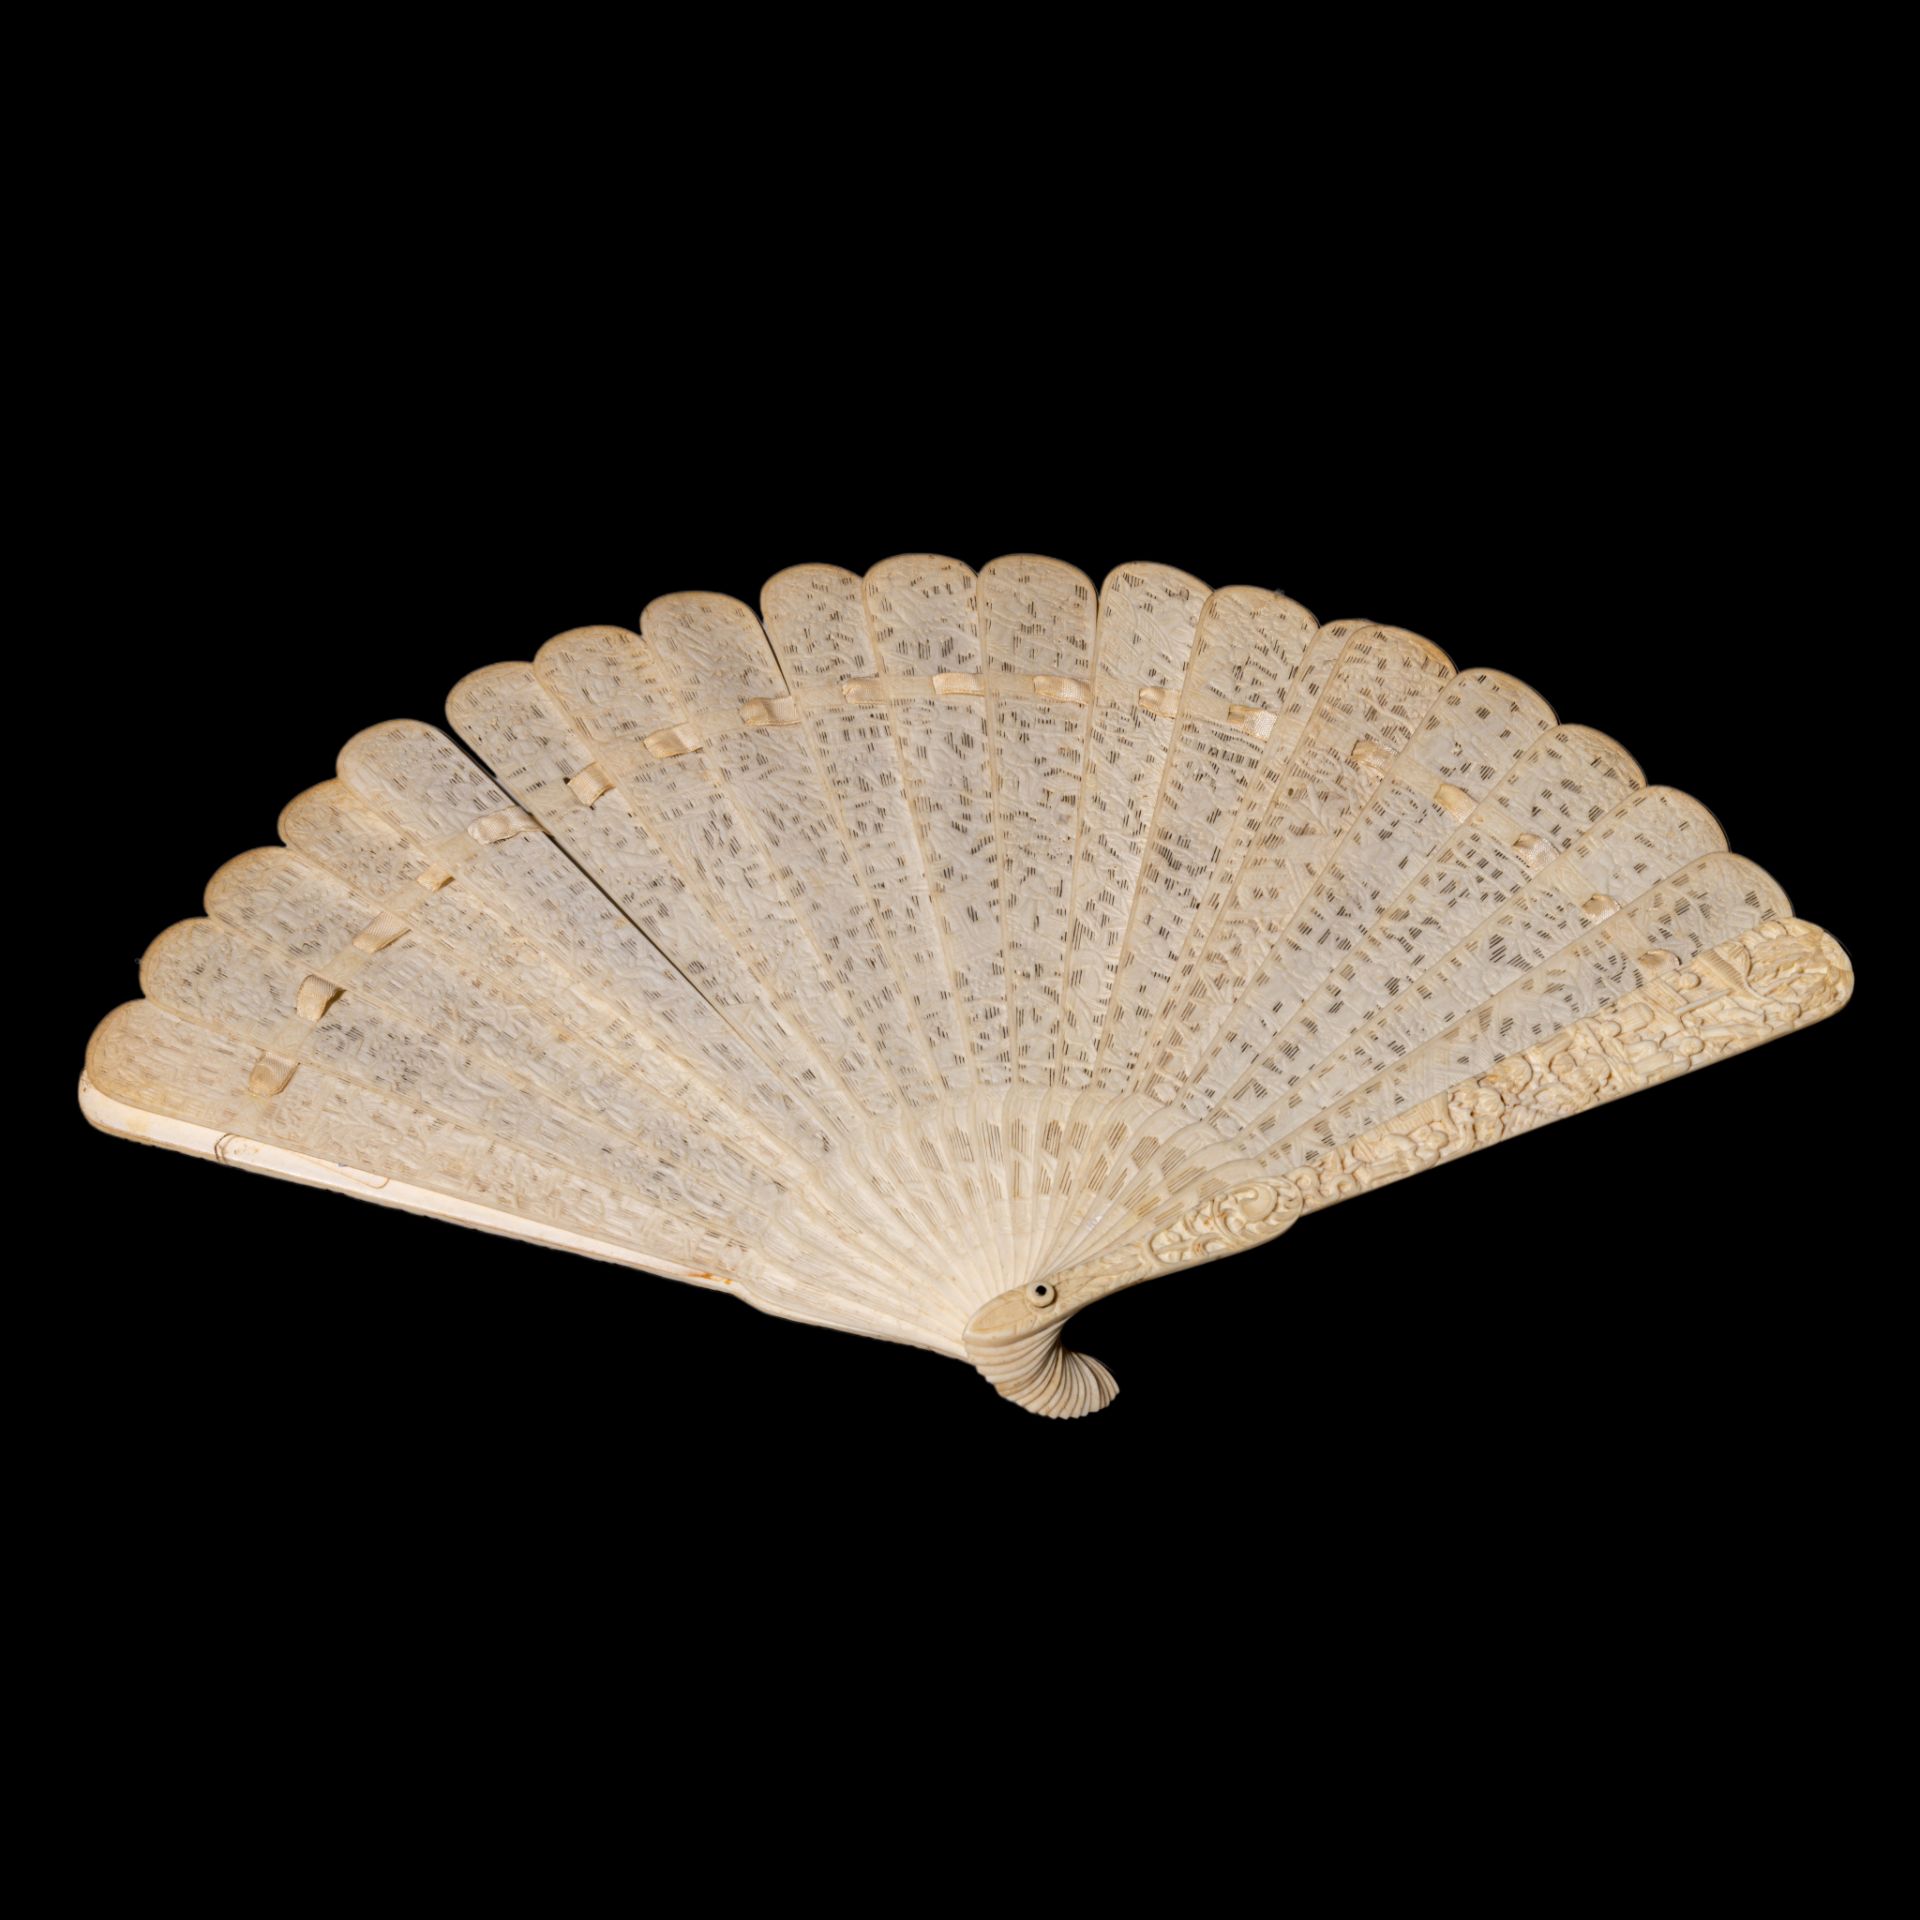 Three Chinese late Qing / early Republic ivory fans, H 16,4 - 19,4 - 20,3 cm / 39 - 77 - 54 g. - W f - Bild 2 aus 12